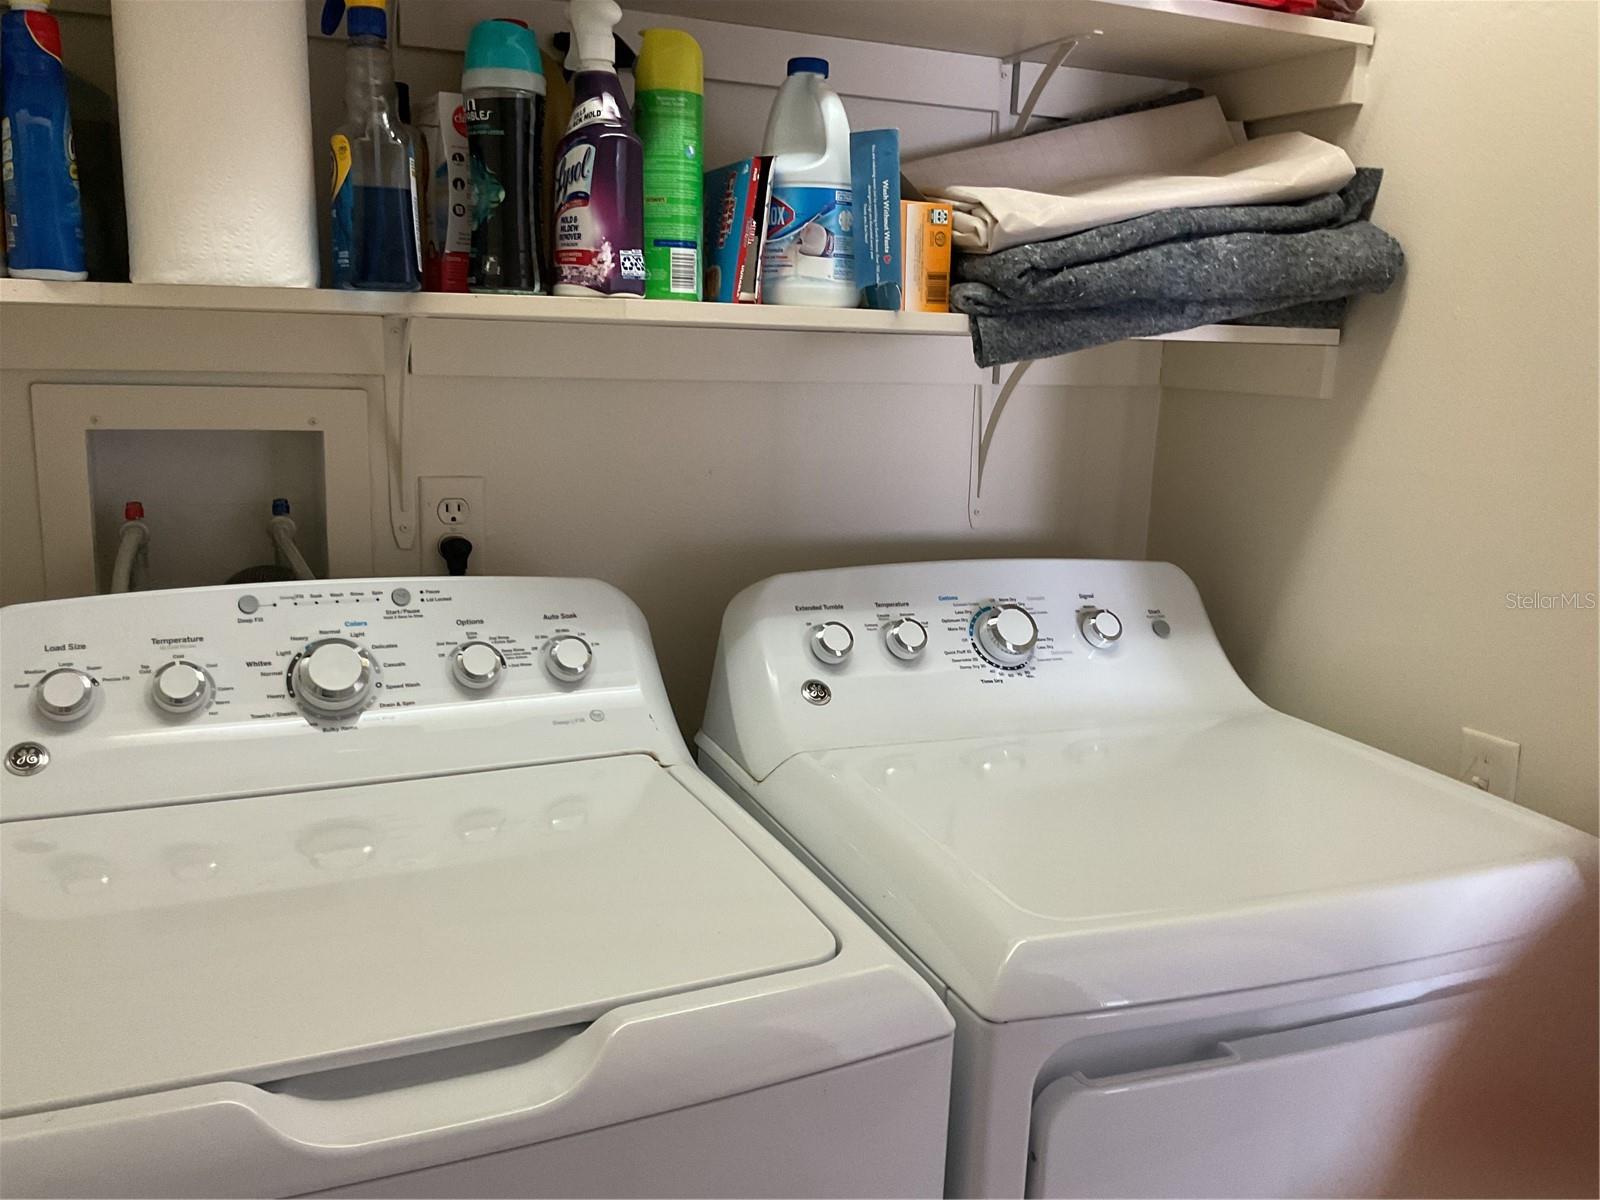 Laundry room in hallway (washer and dryer stay)